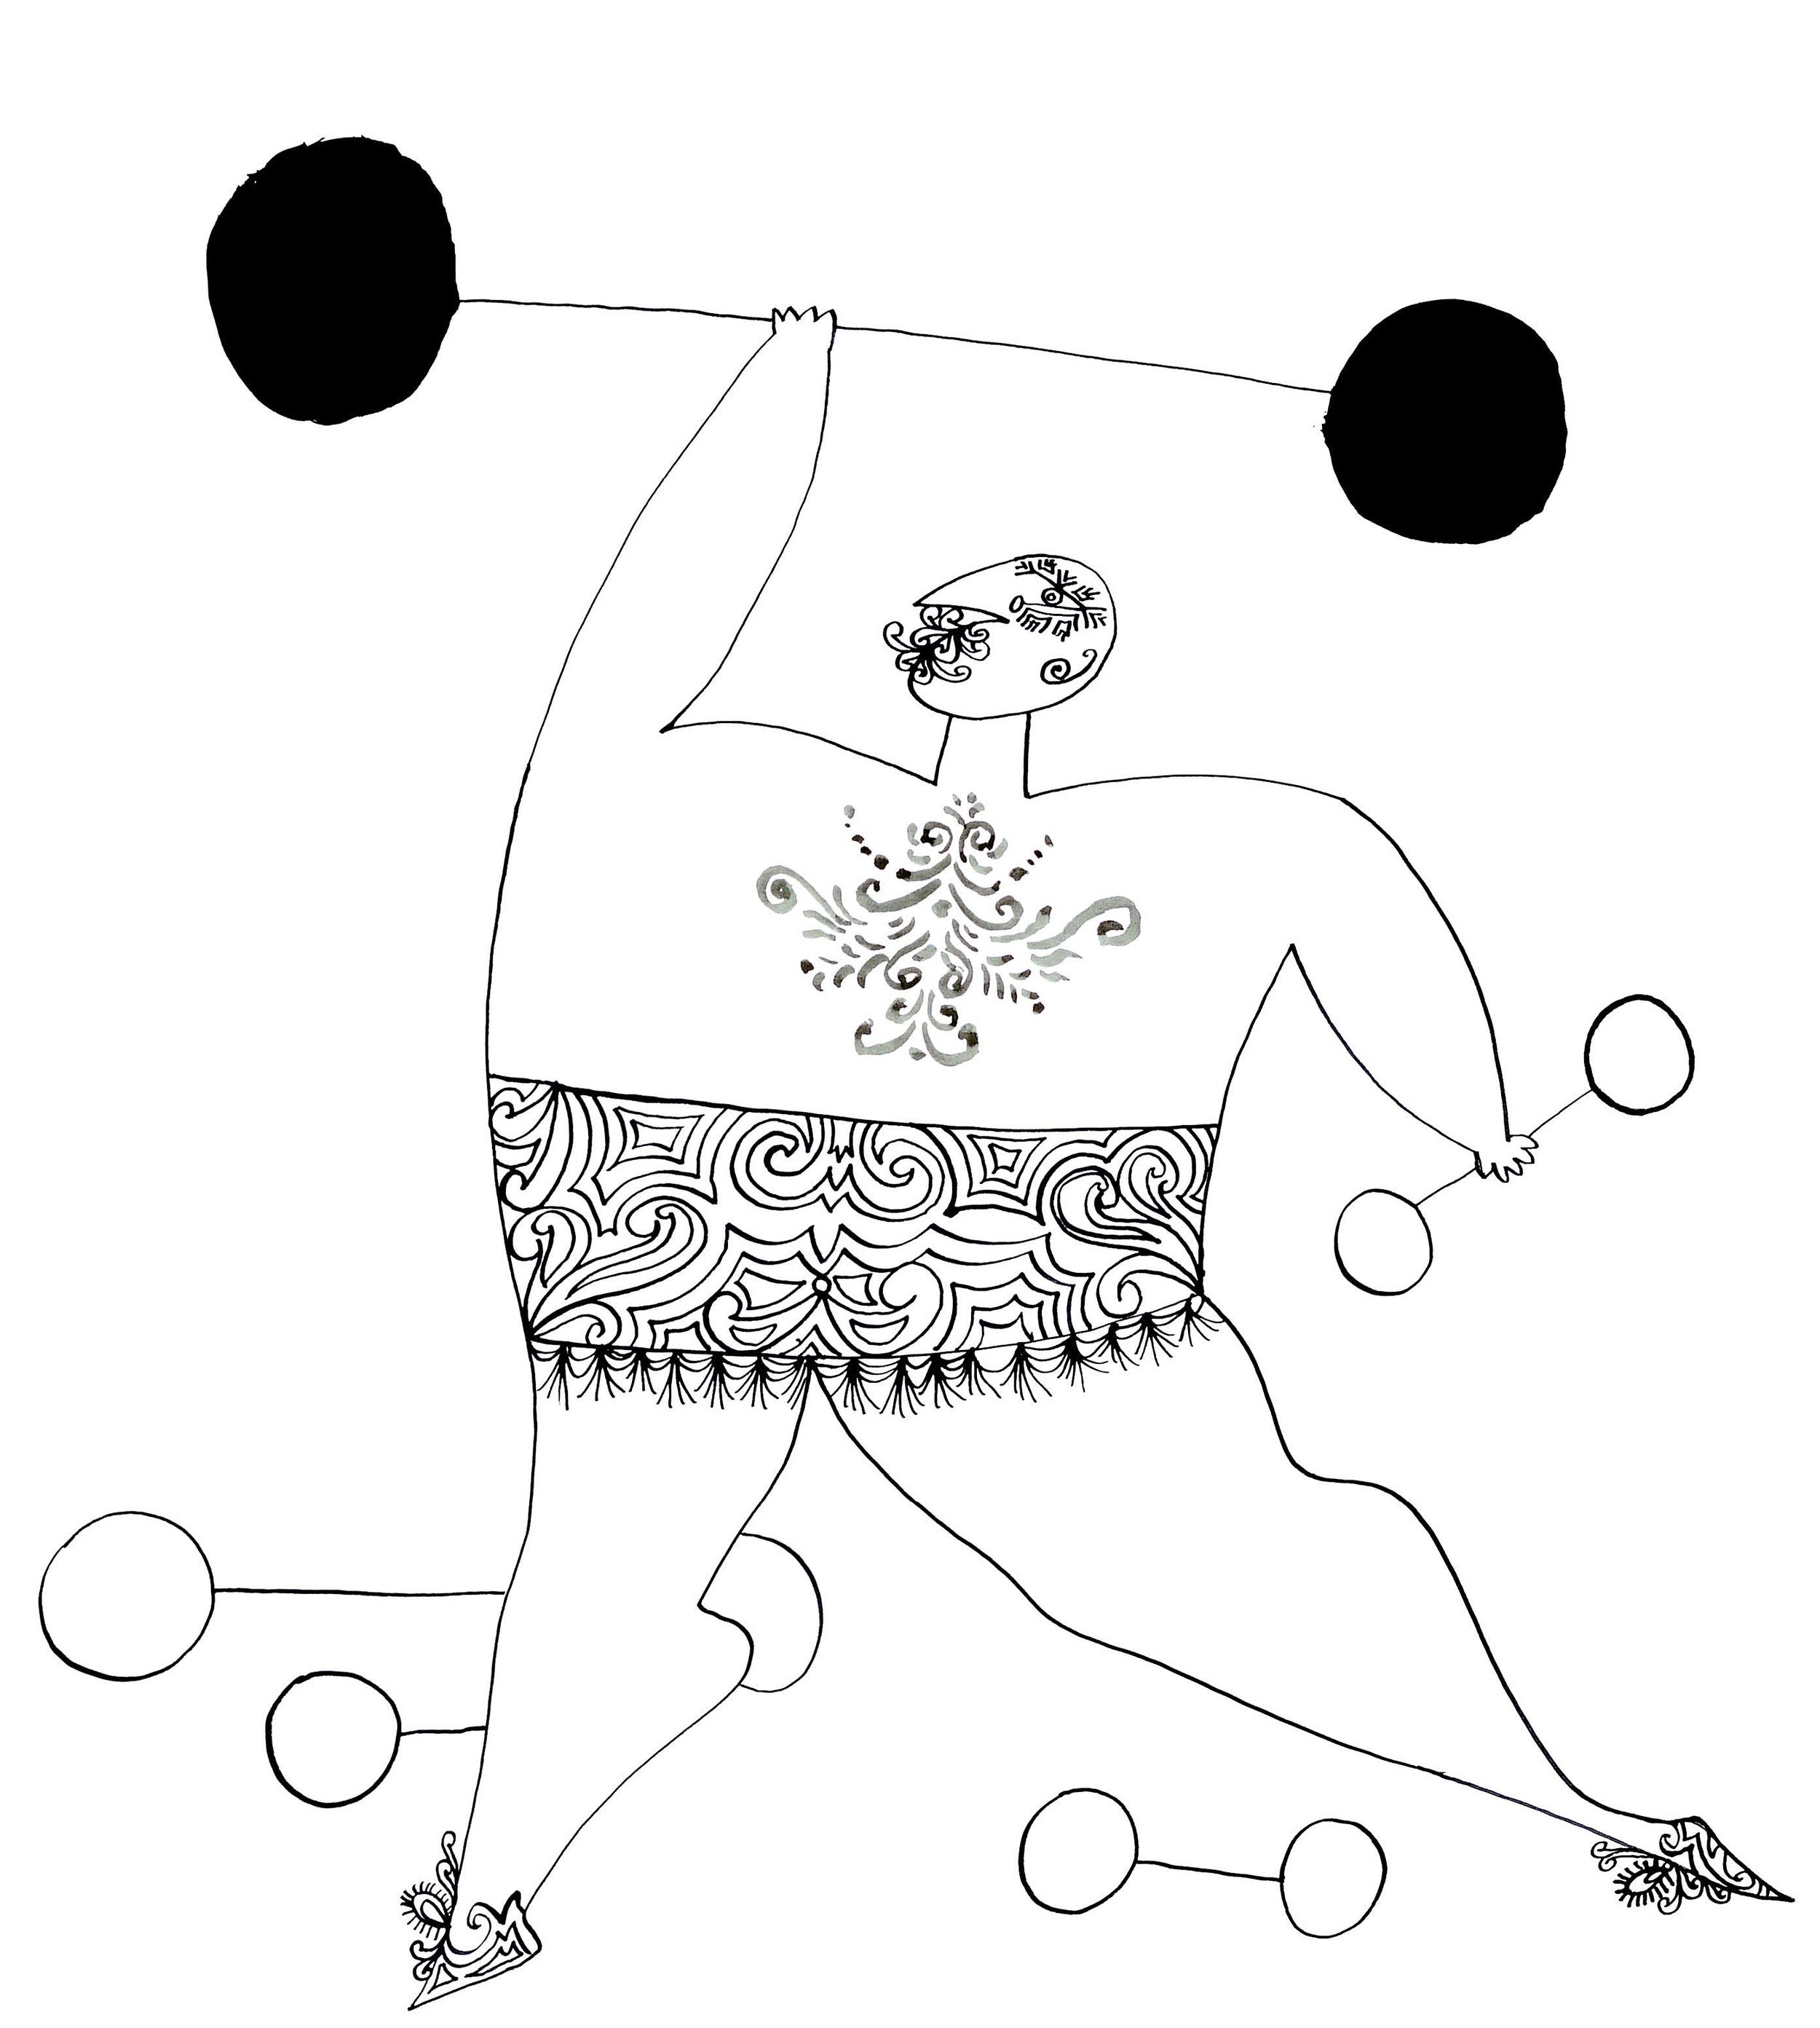   Circus Weight Lifter    Ink on paper 1956   